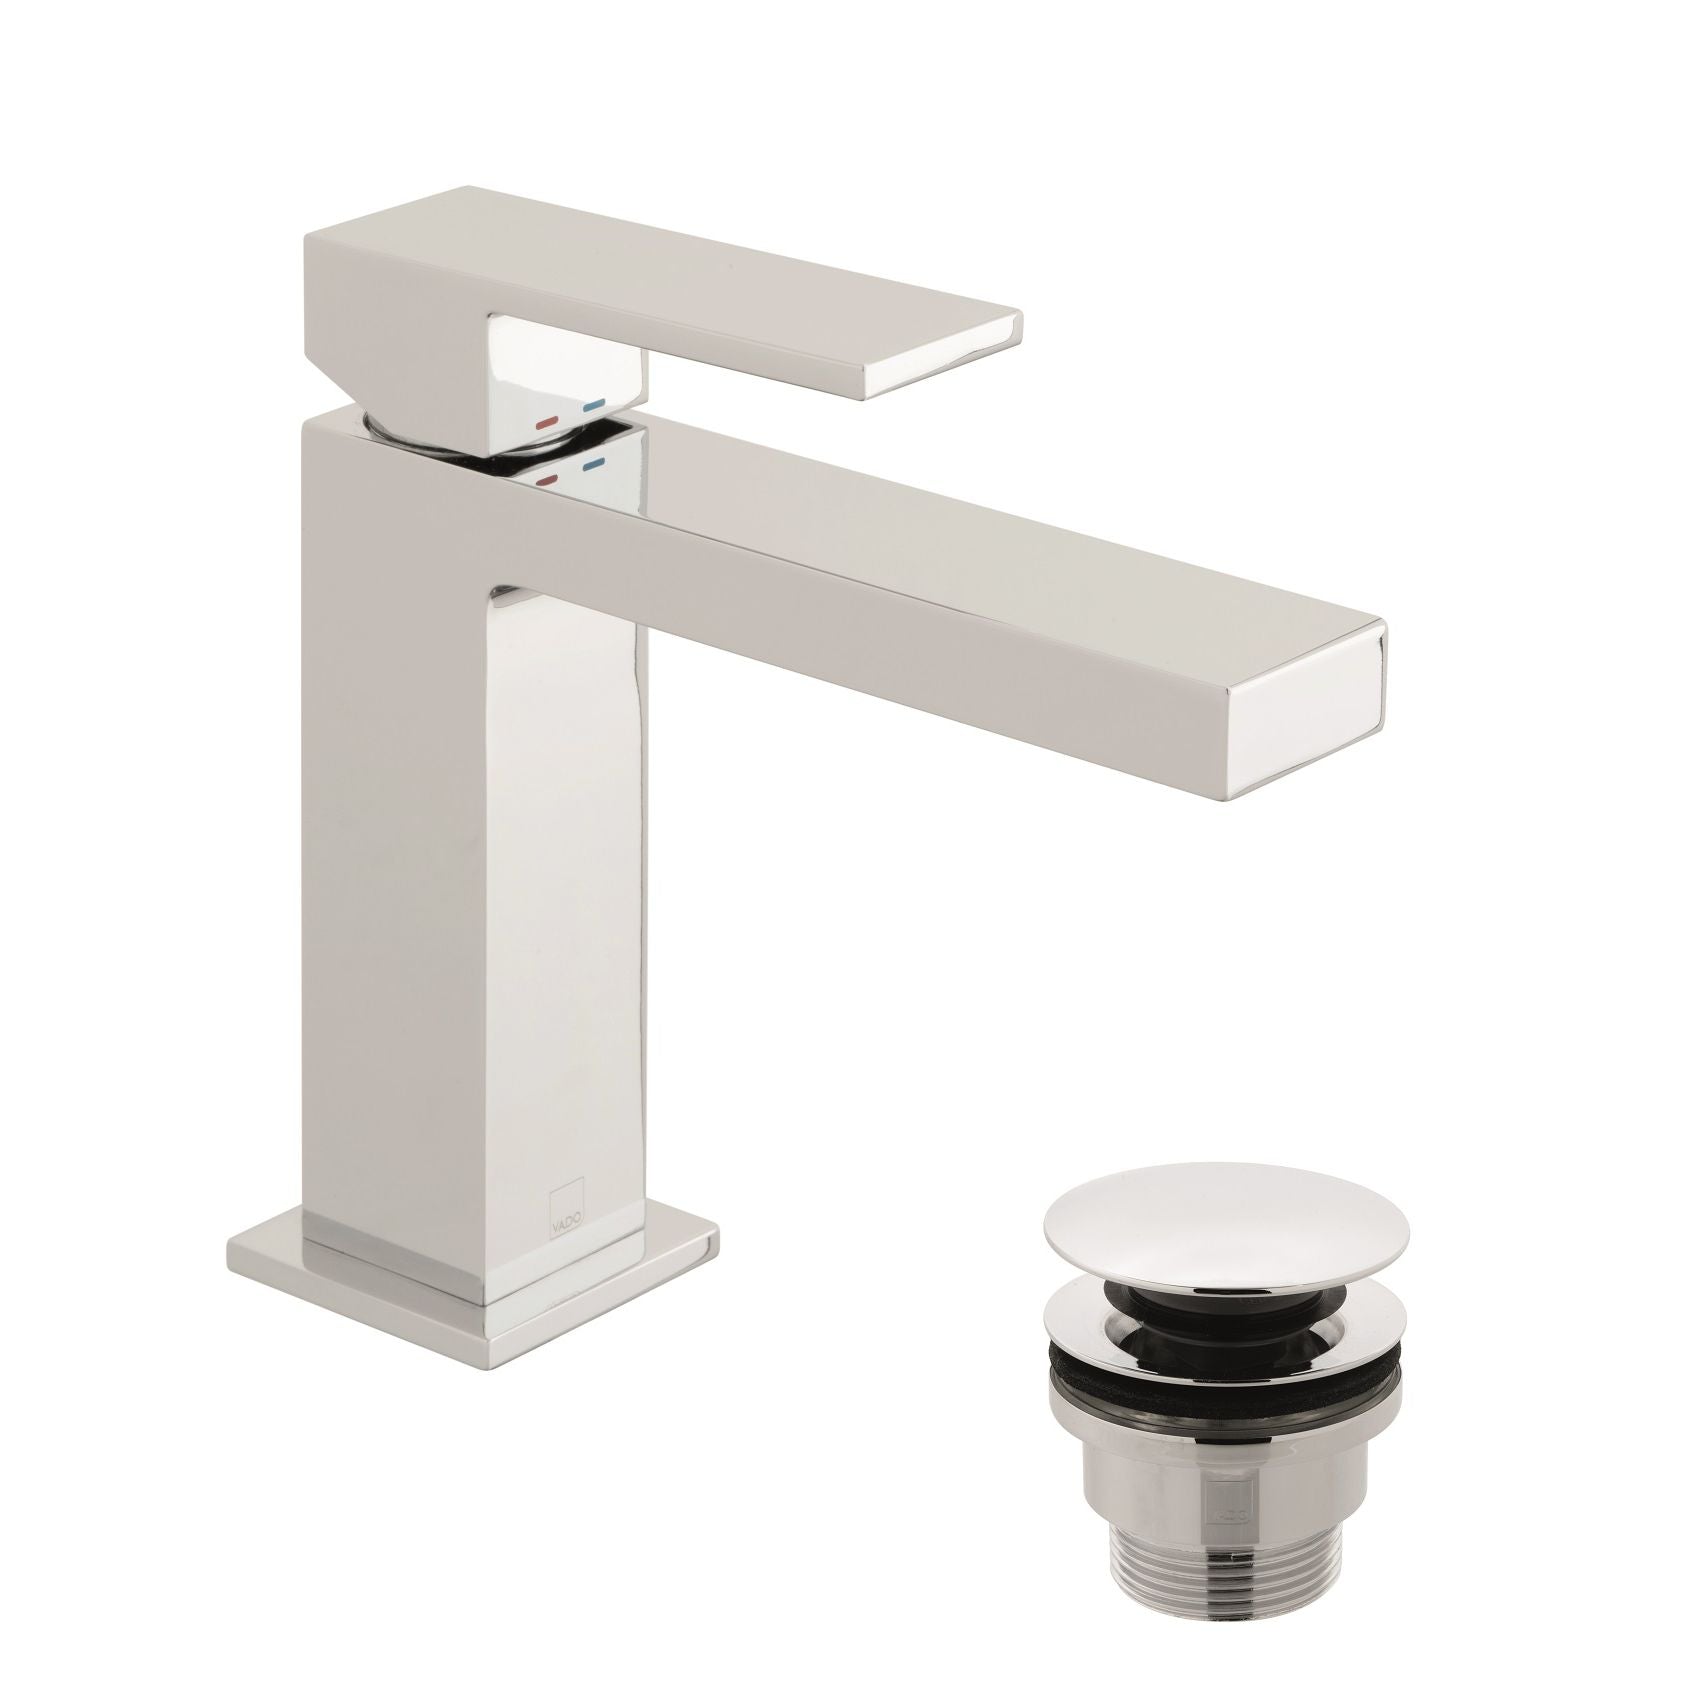 Vado Notion Slimline Mono Basin Mixer Smooth Bodied Single Lever Deck Mounted with Universal Waste